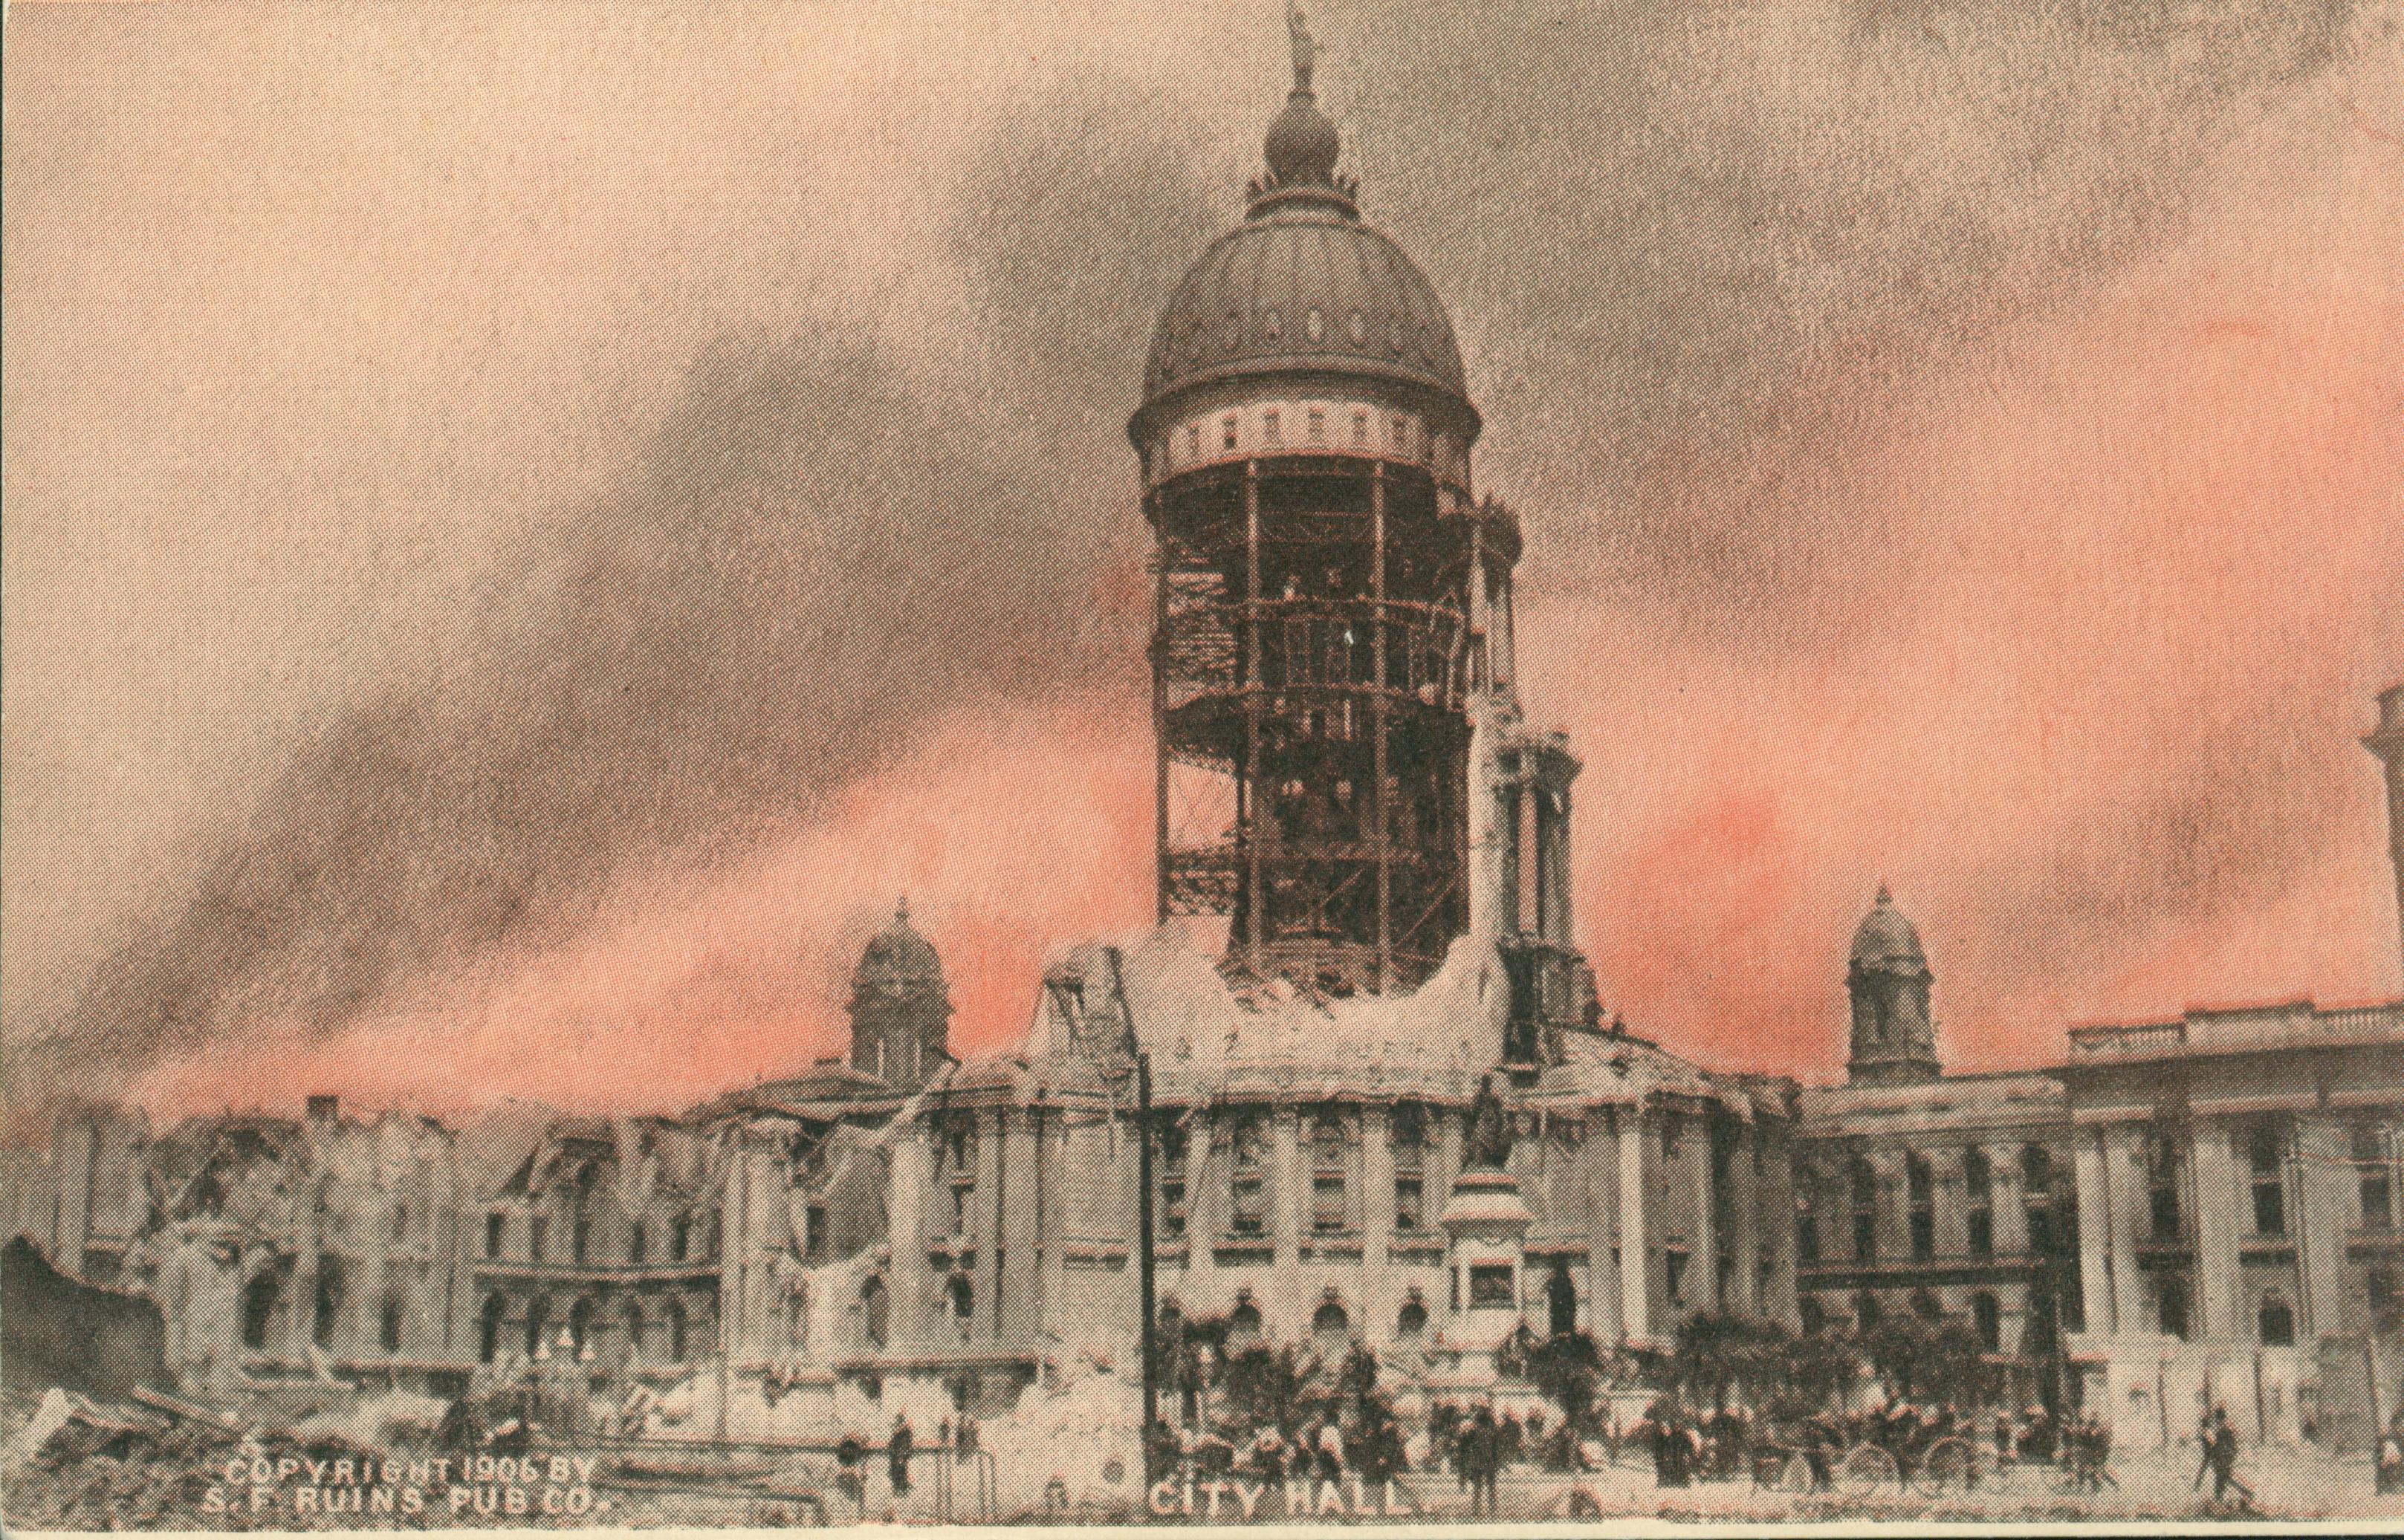 Shows the ruins of San Francisco's city hall with a fire raging in the background